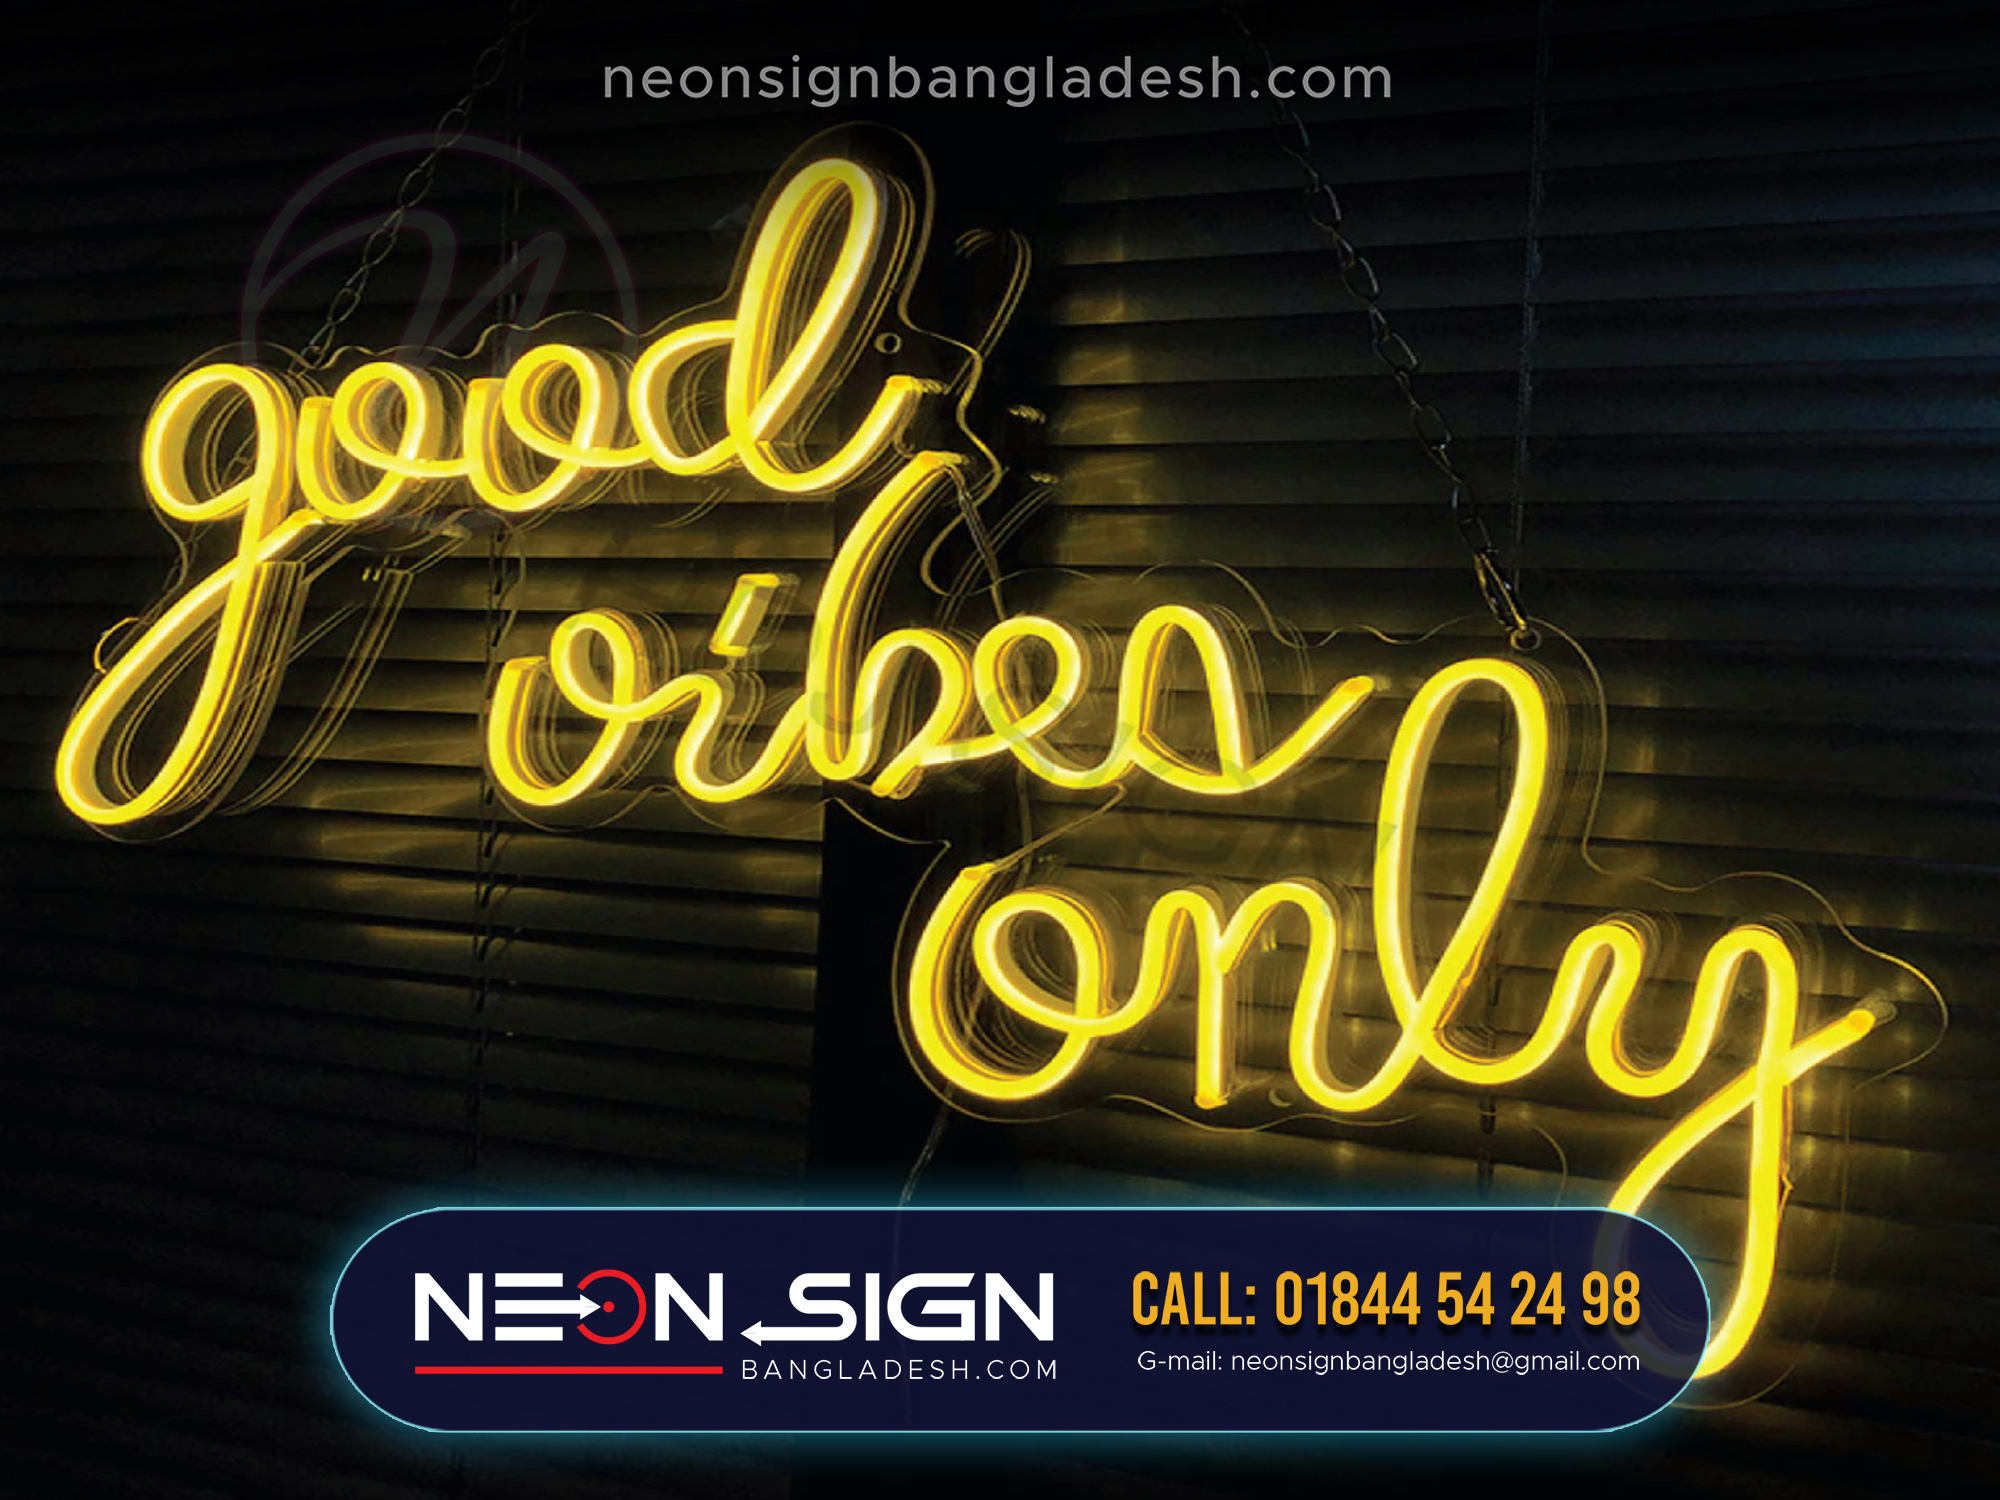 The Best Quality Neon Signage Company in Bangladesh, Neon sign Bangladesh is the Best LED & NEON Signage Manufacturer Company in Bangladesh our service product; Led Sign Board Best Quality, Neon Sign Board, Neon Sign, Cloud Led Neon Light Wall Light Wall Décor